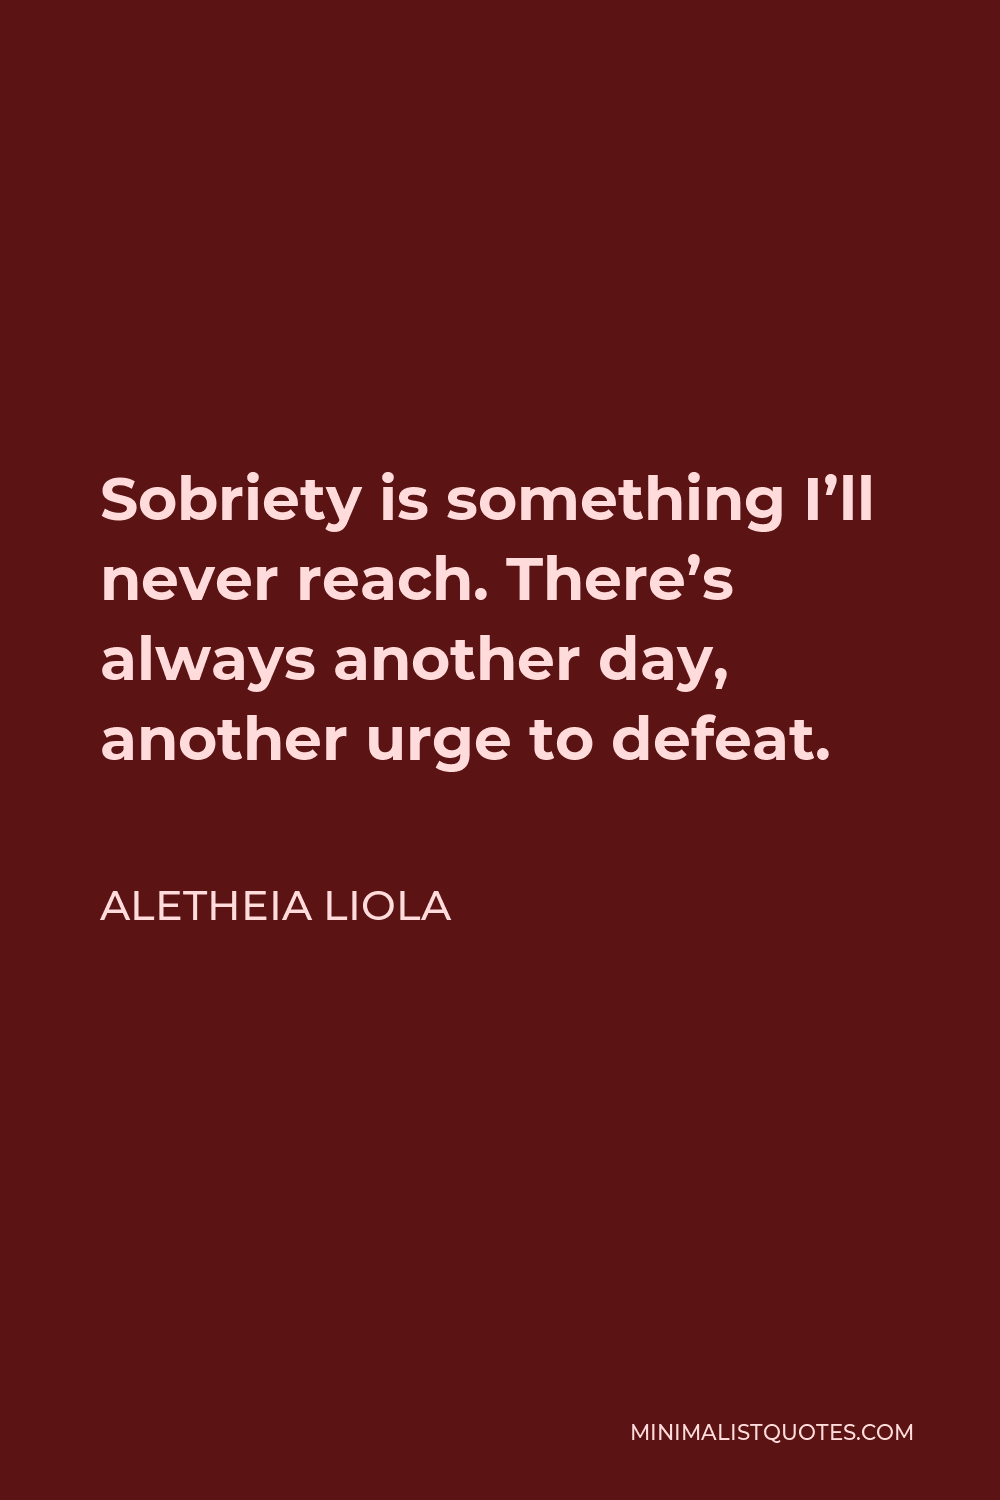 Aletheia Liola Quote - Sobriety is something I’ll never reach. There’s always another day, another urge to defeat.